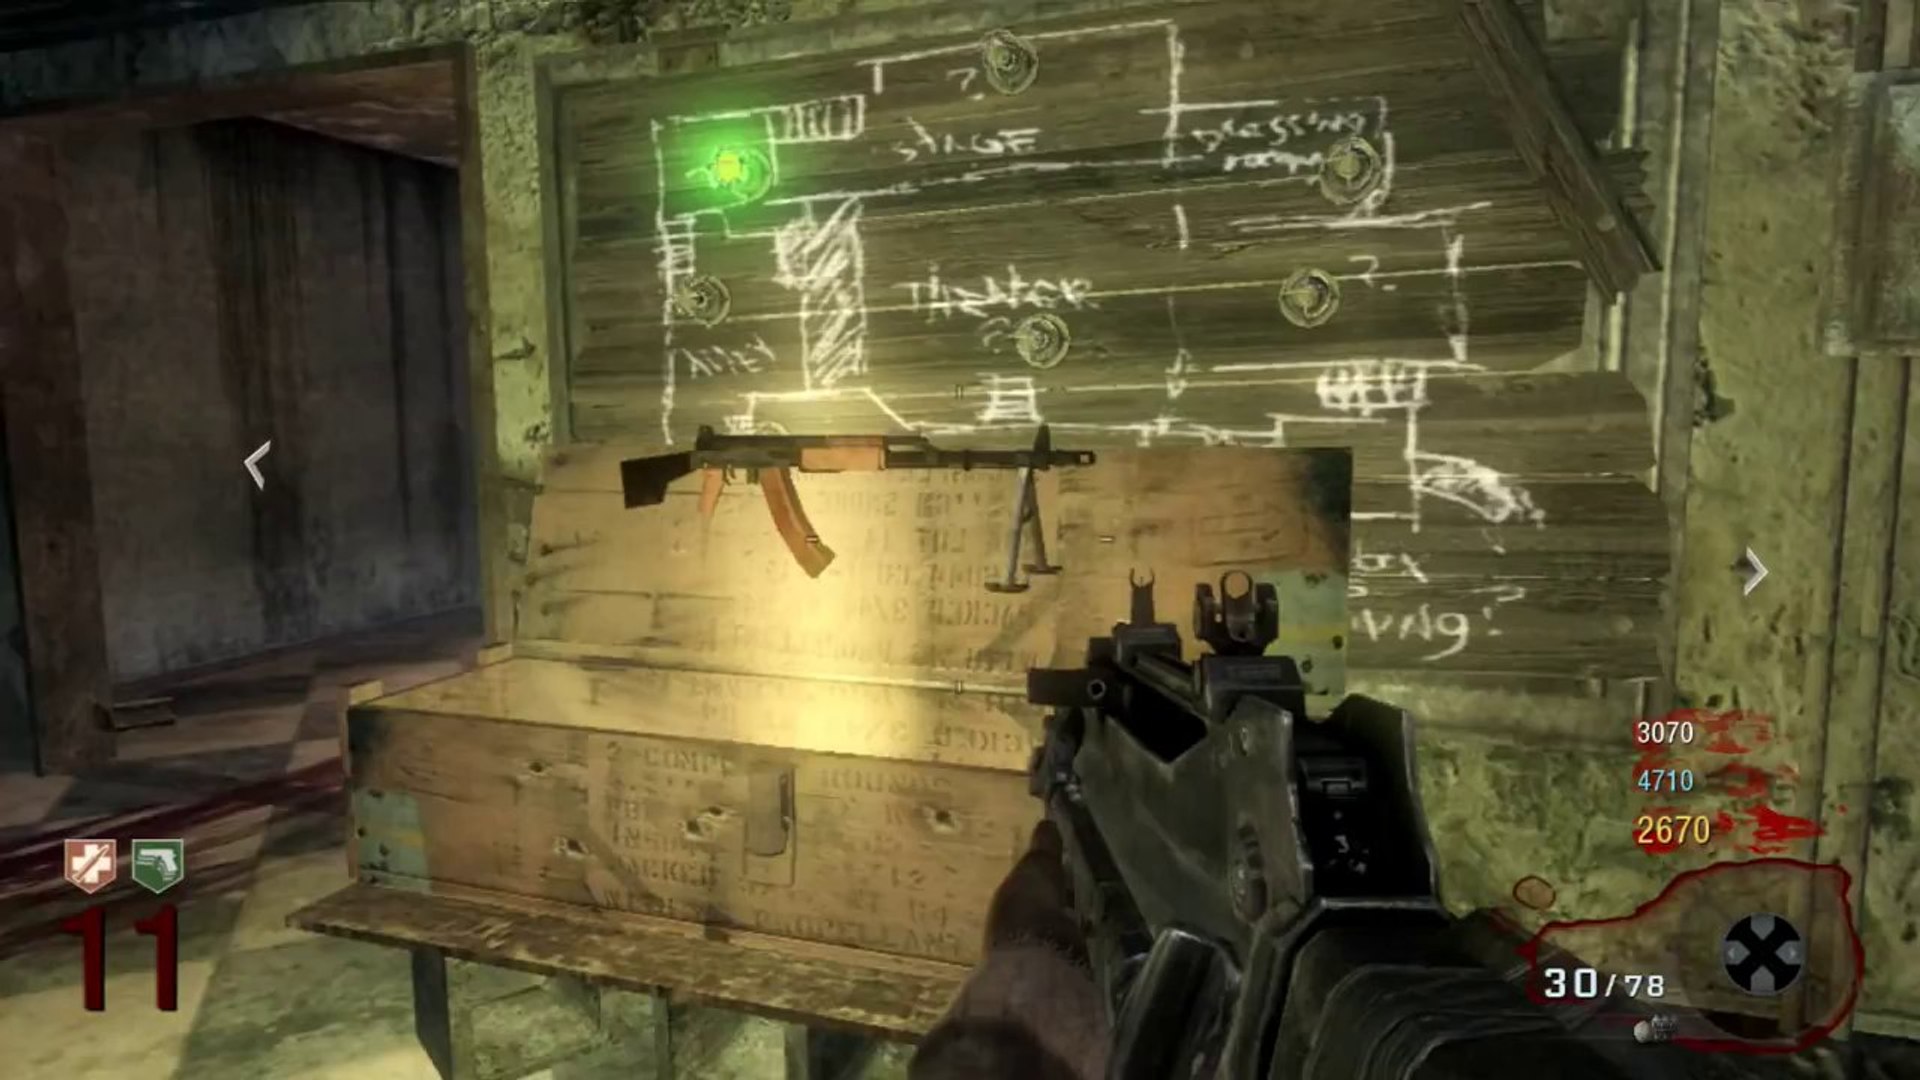 Cod Zombies Origins Kino Der Toten Trying To Find All The Movie Reels Part 2 Video Dailymotion